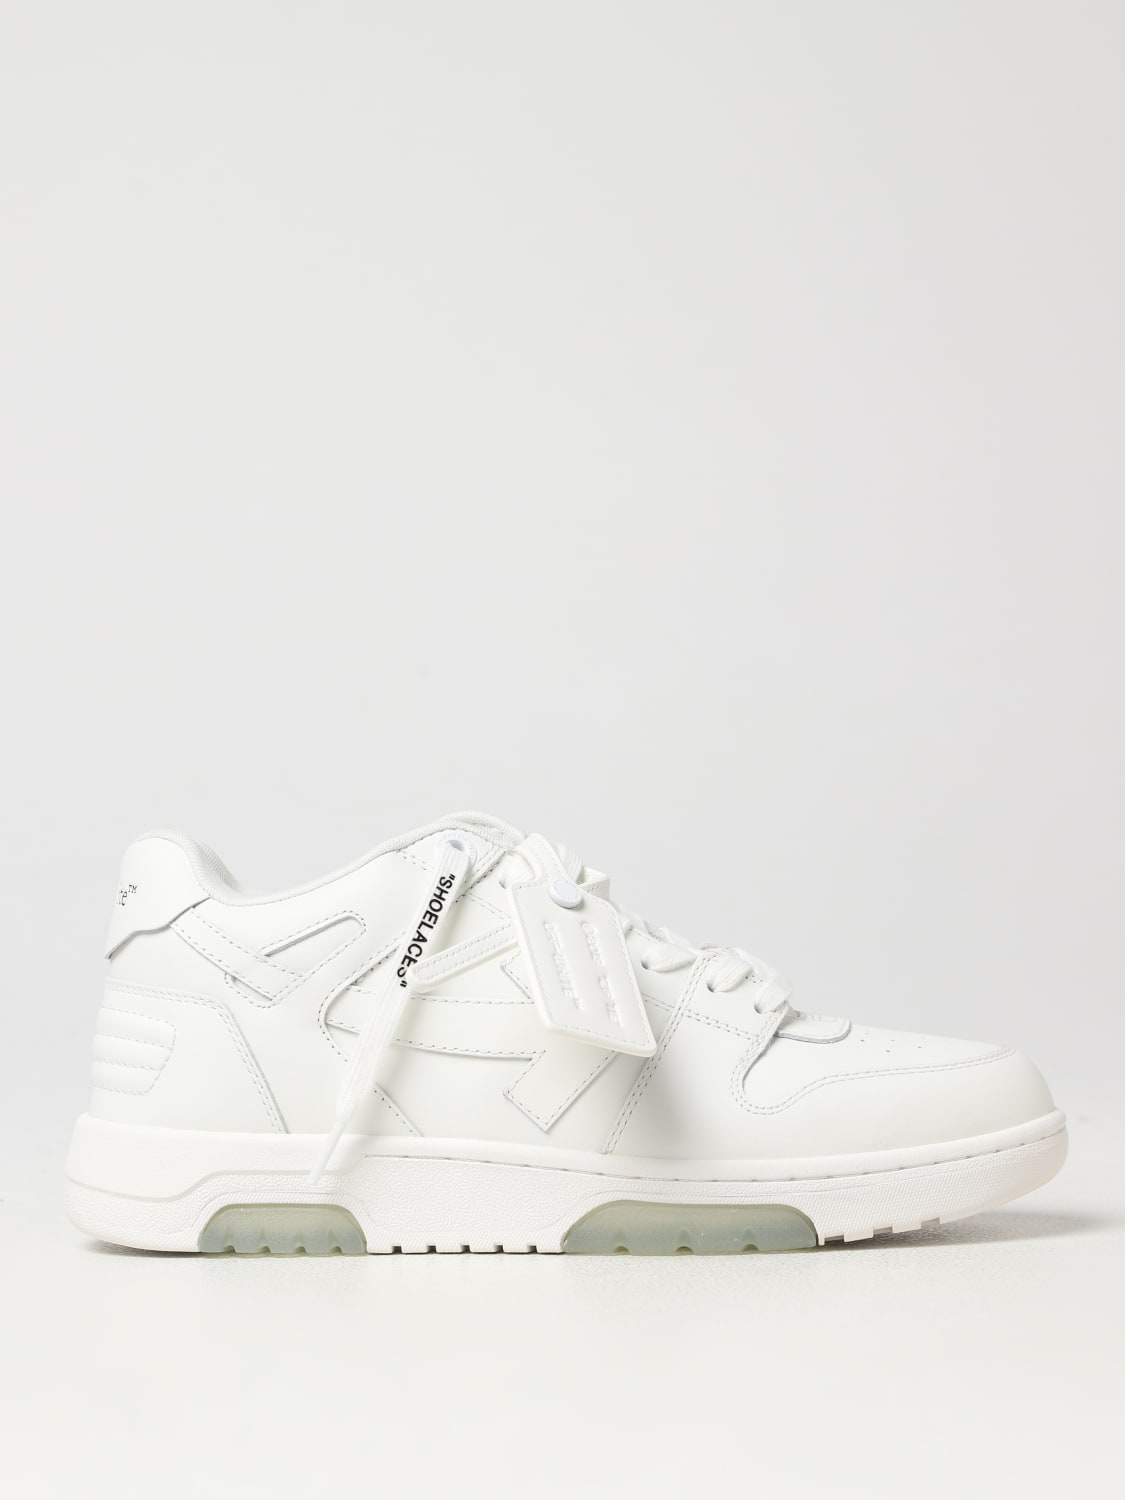 OFF-WHITE Out of Office Leather Sneakers for Men  White nike shoes, White  shoes sneakers, Leather sneakers